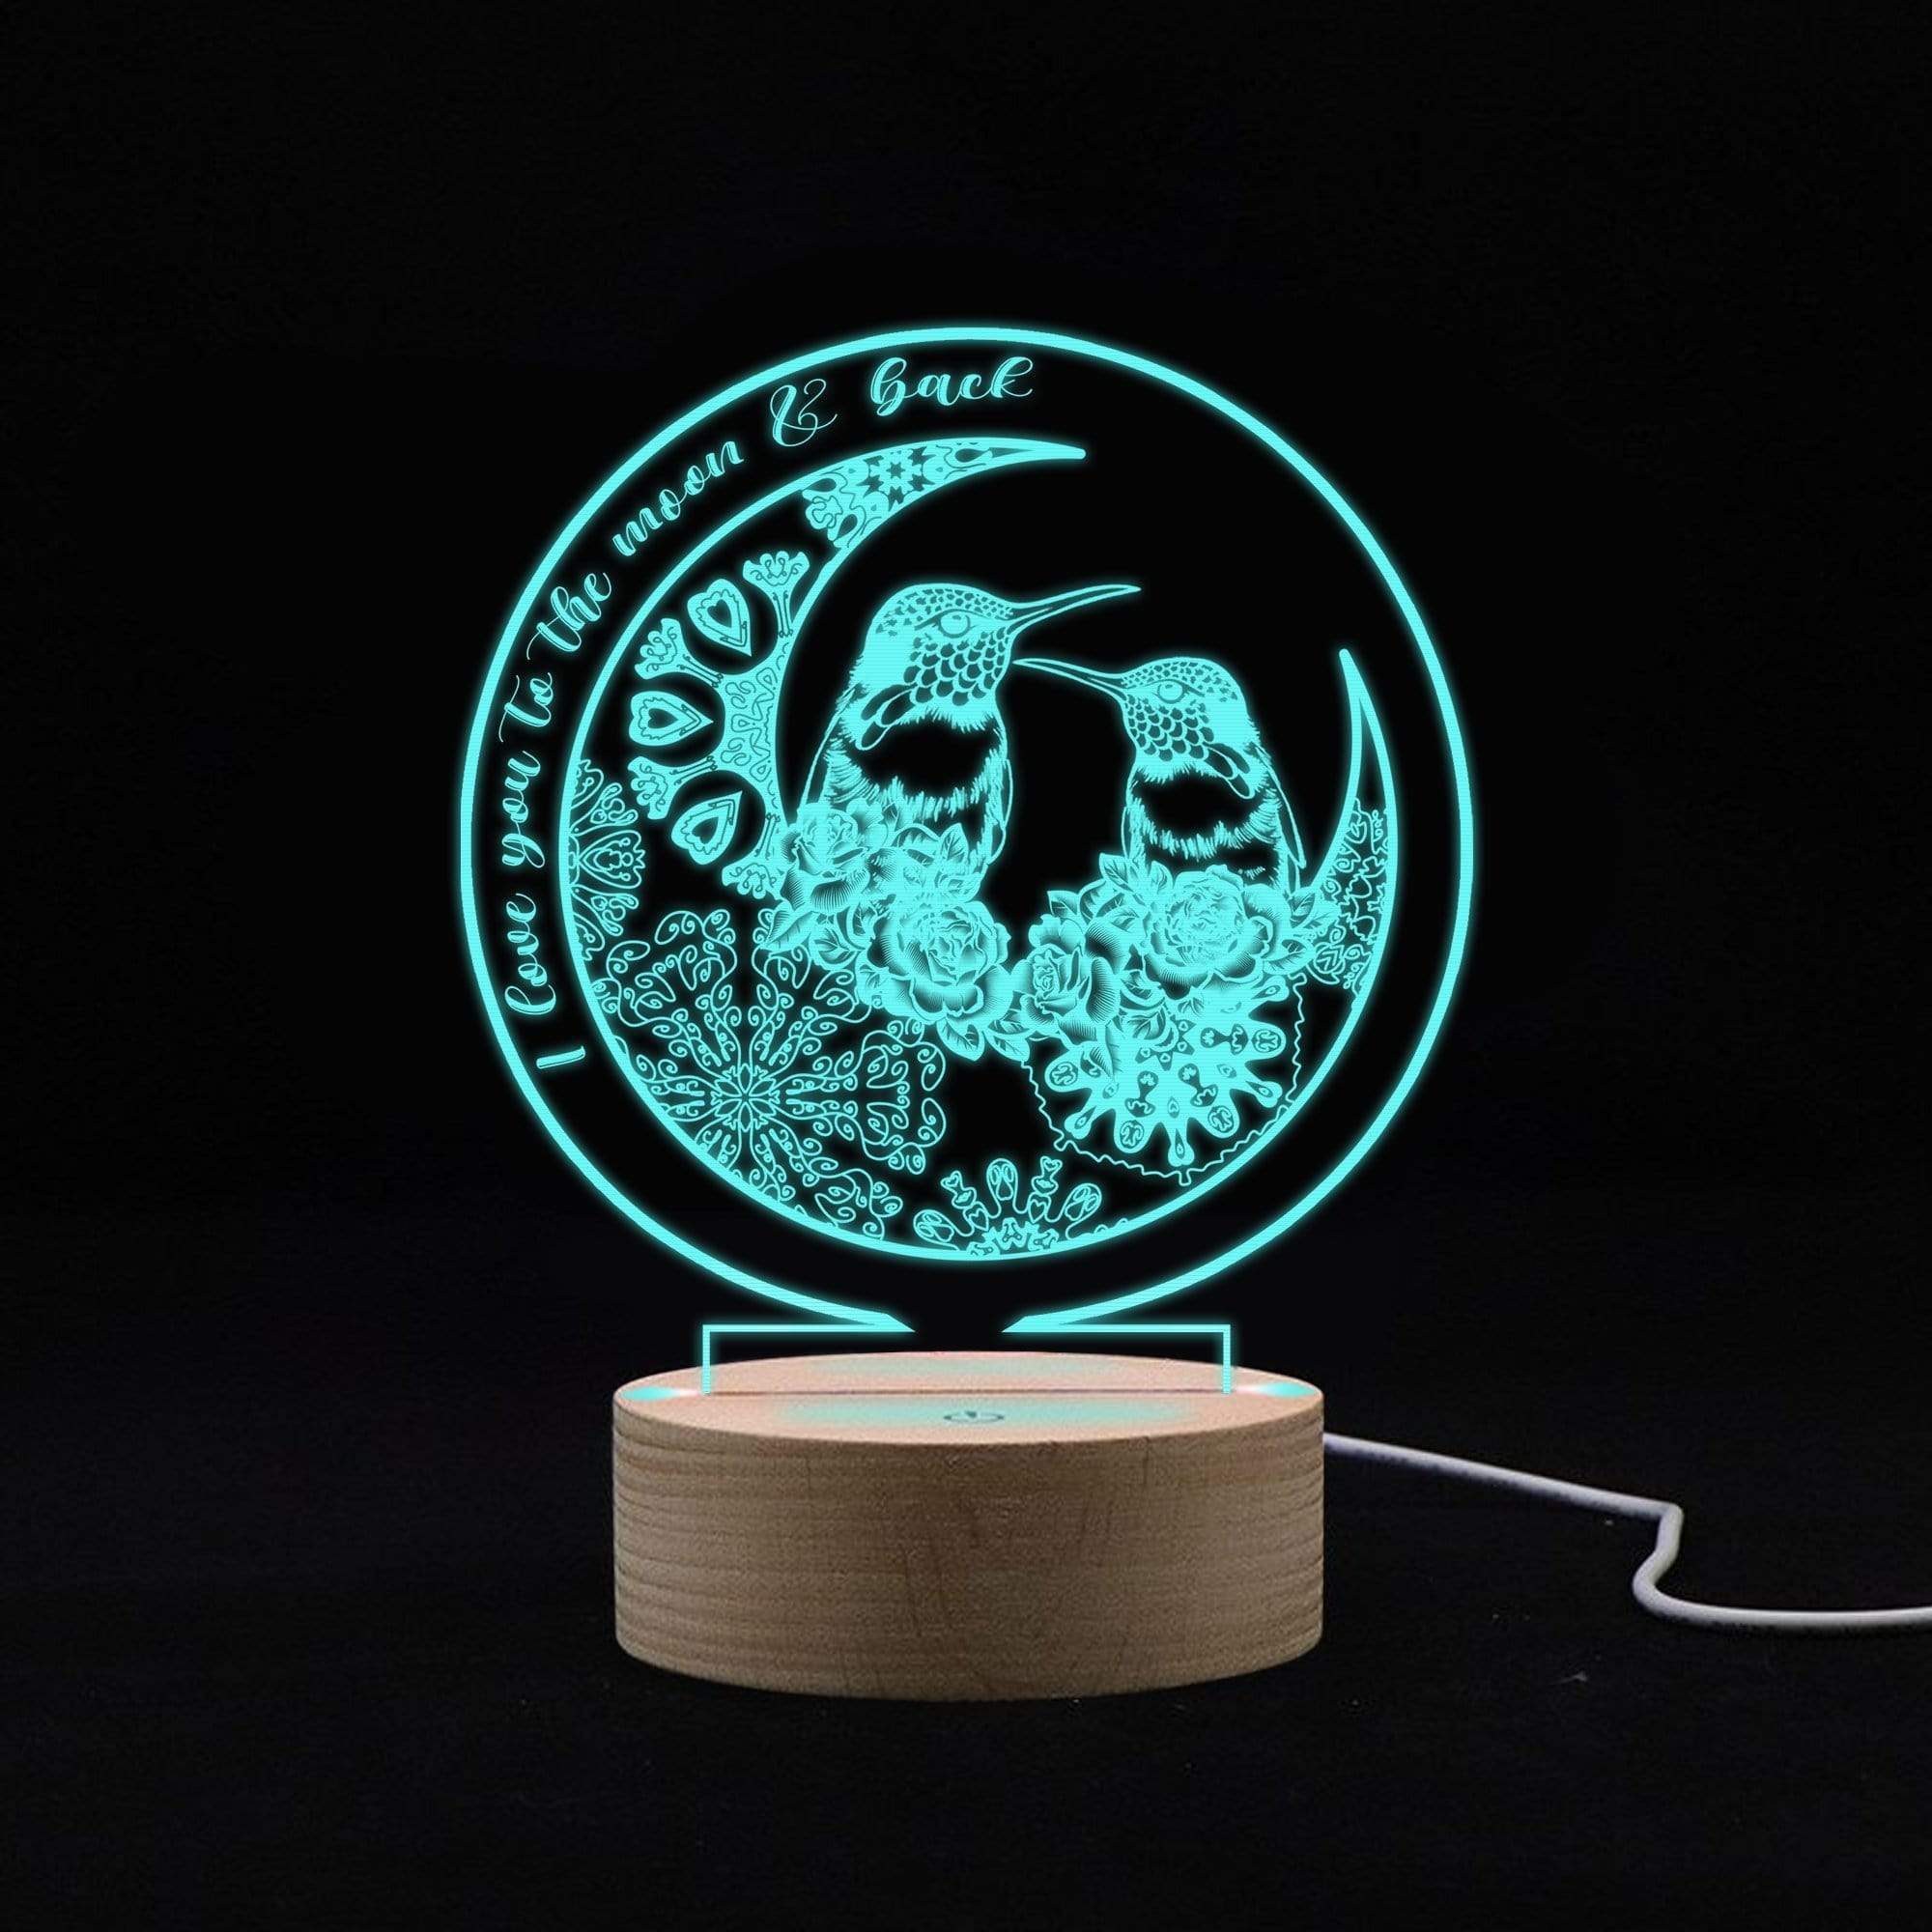 Hummingbird I love you to the moon and back Color changing touch led light Gift for you, gift for him, gift for her, gift for hummingbird lover